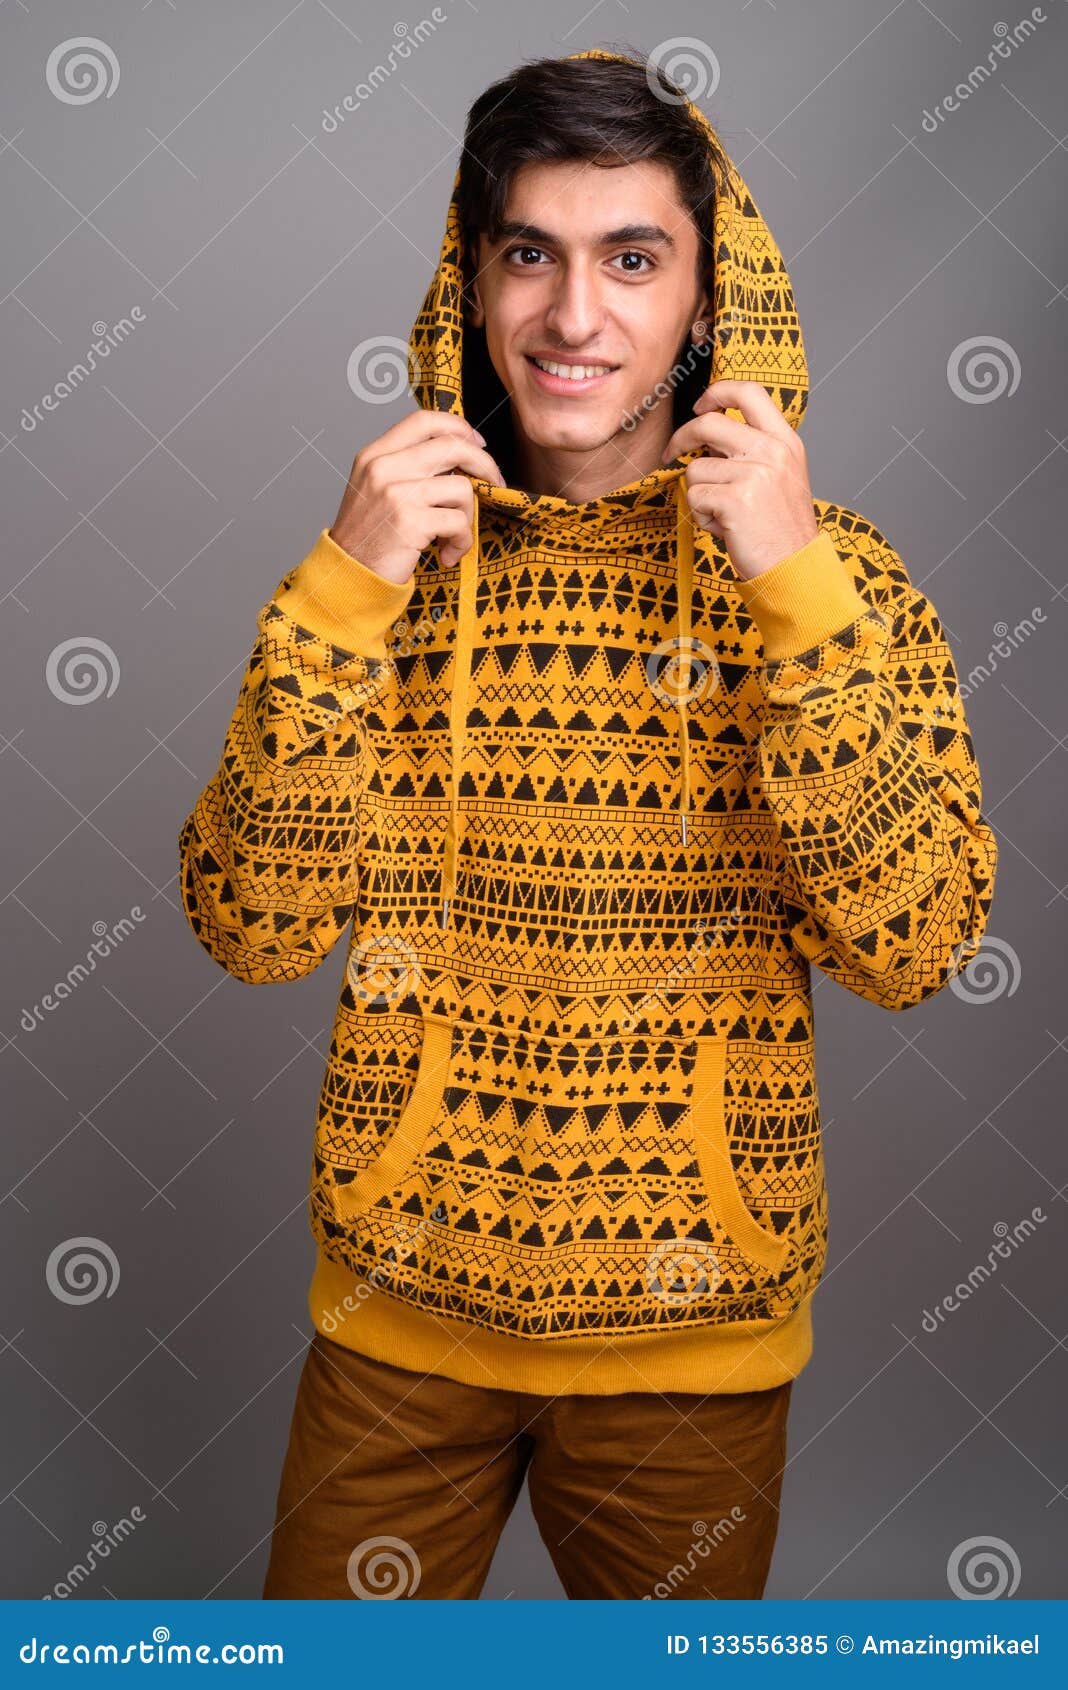 Young Handsome Persian Teenage Boy Against Gray Background Stock Image ...